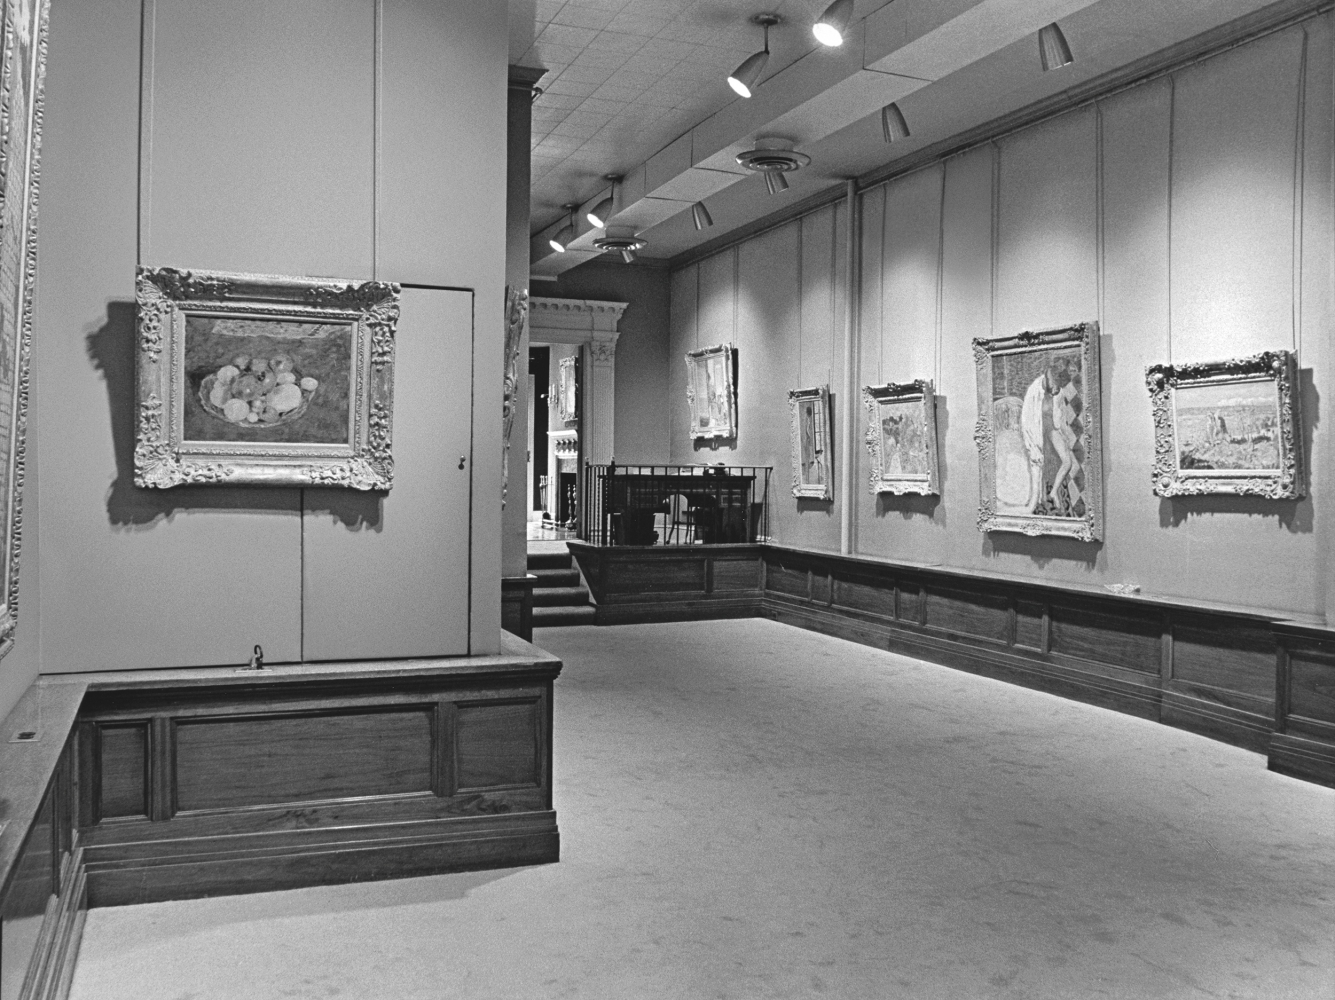 Installation view of&nbsp;Bonnard,&nbsp;on view at Acquavella Galleries from November 9&ndash;December 11, 1965 at 119 East Fifty-Seventh Street.